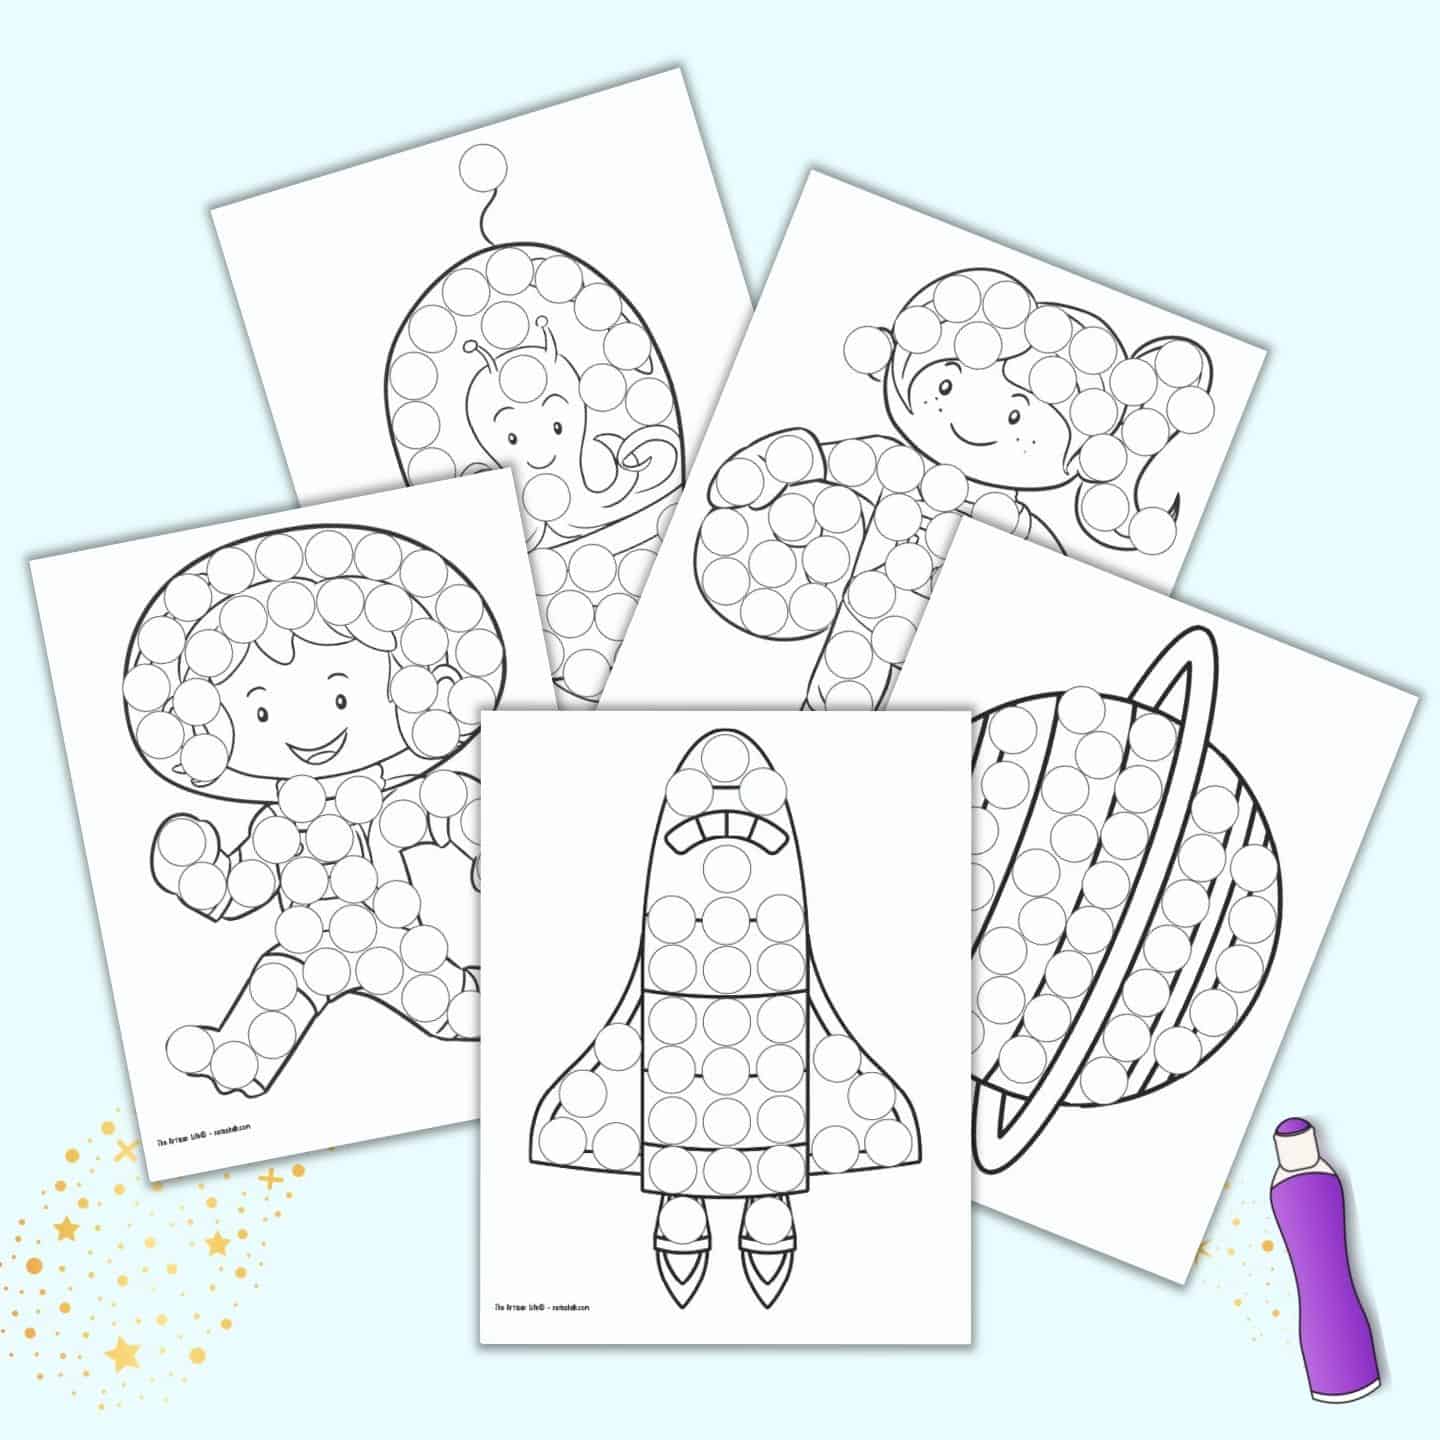 Dot Marker Coloring Pages - The Artisan ...